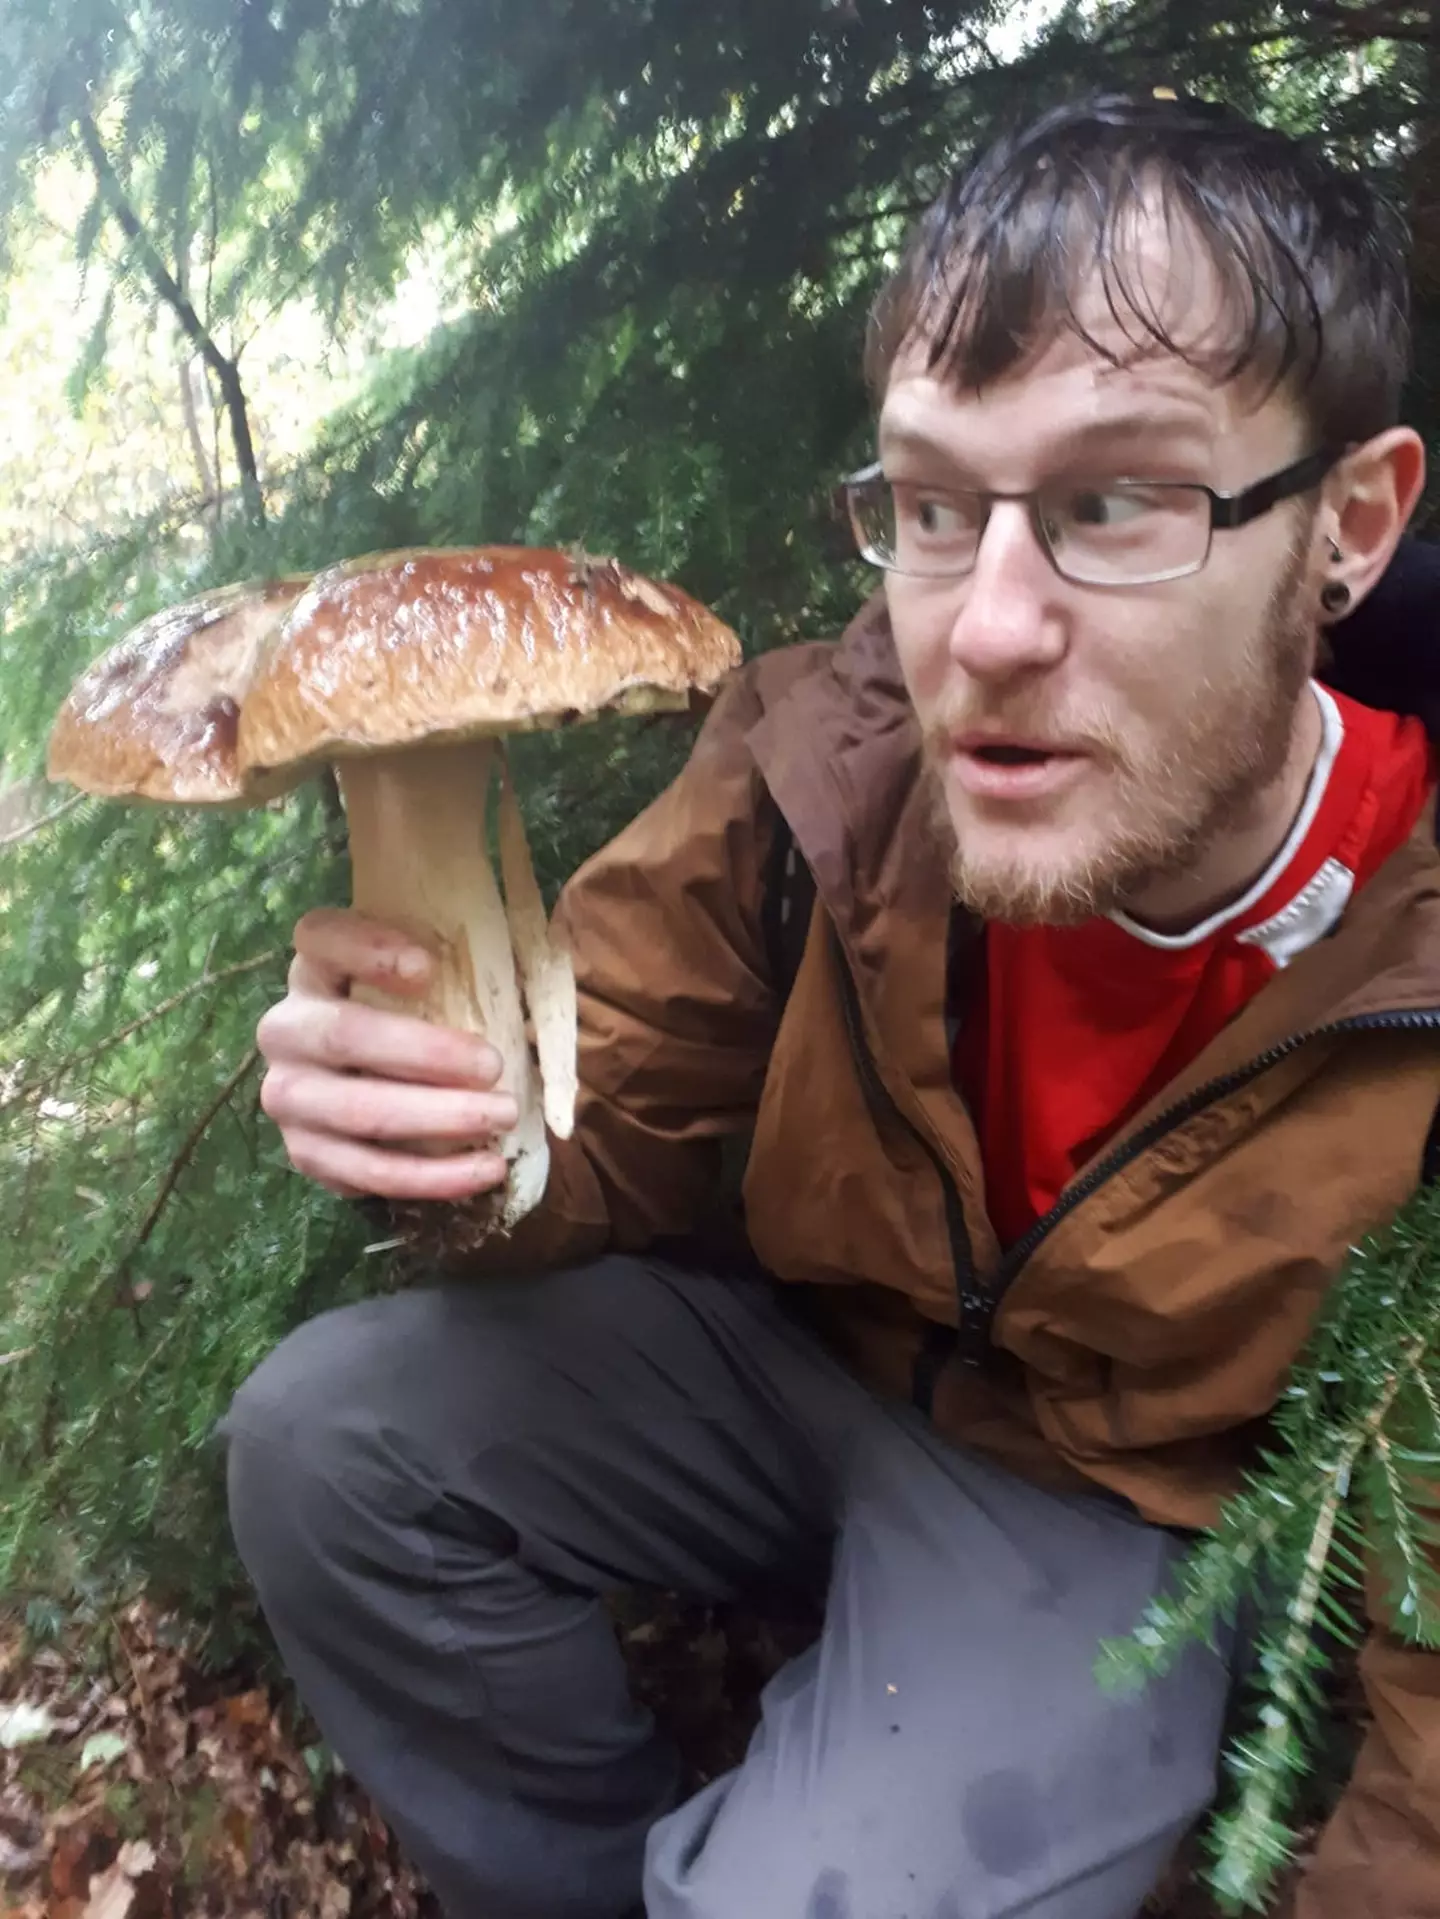 Mike Roberts is thankfully a fungi-enthusiast.